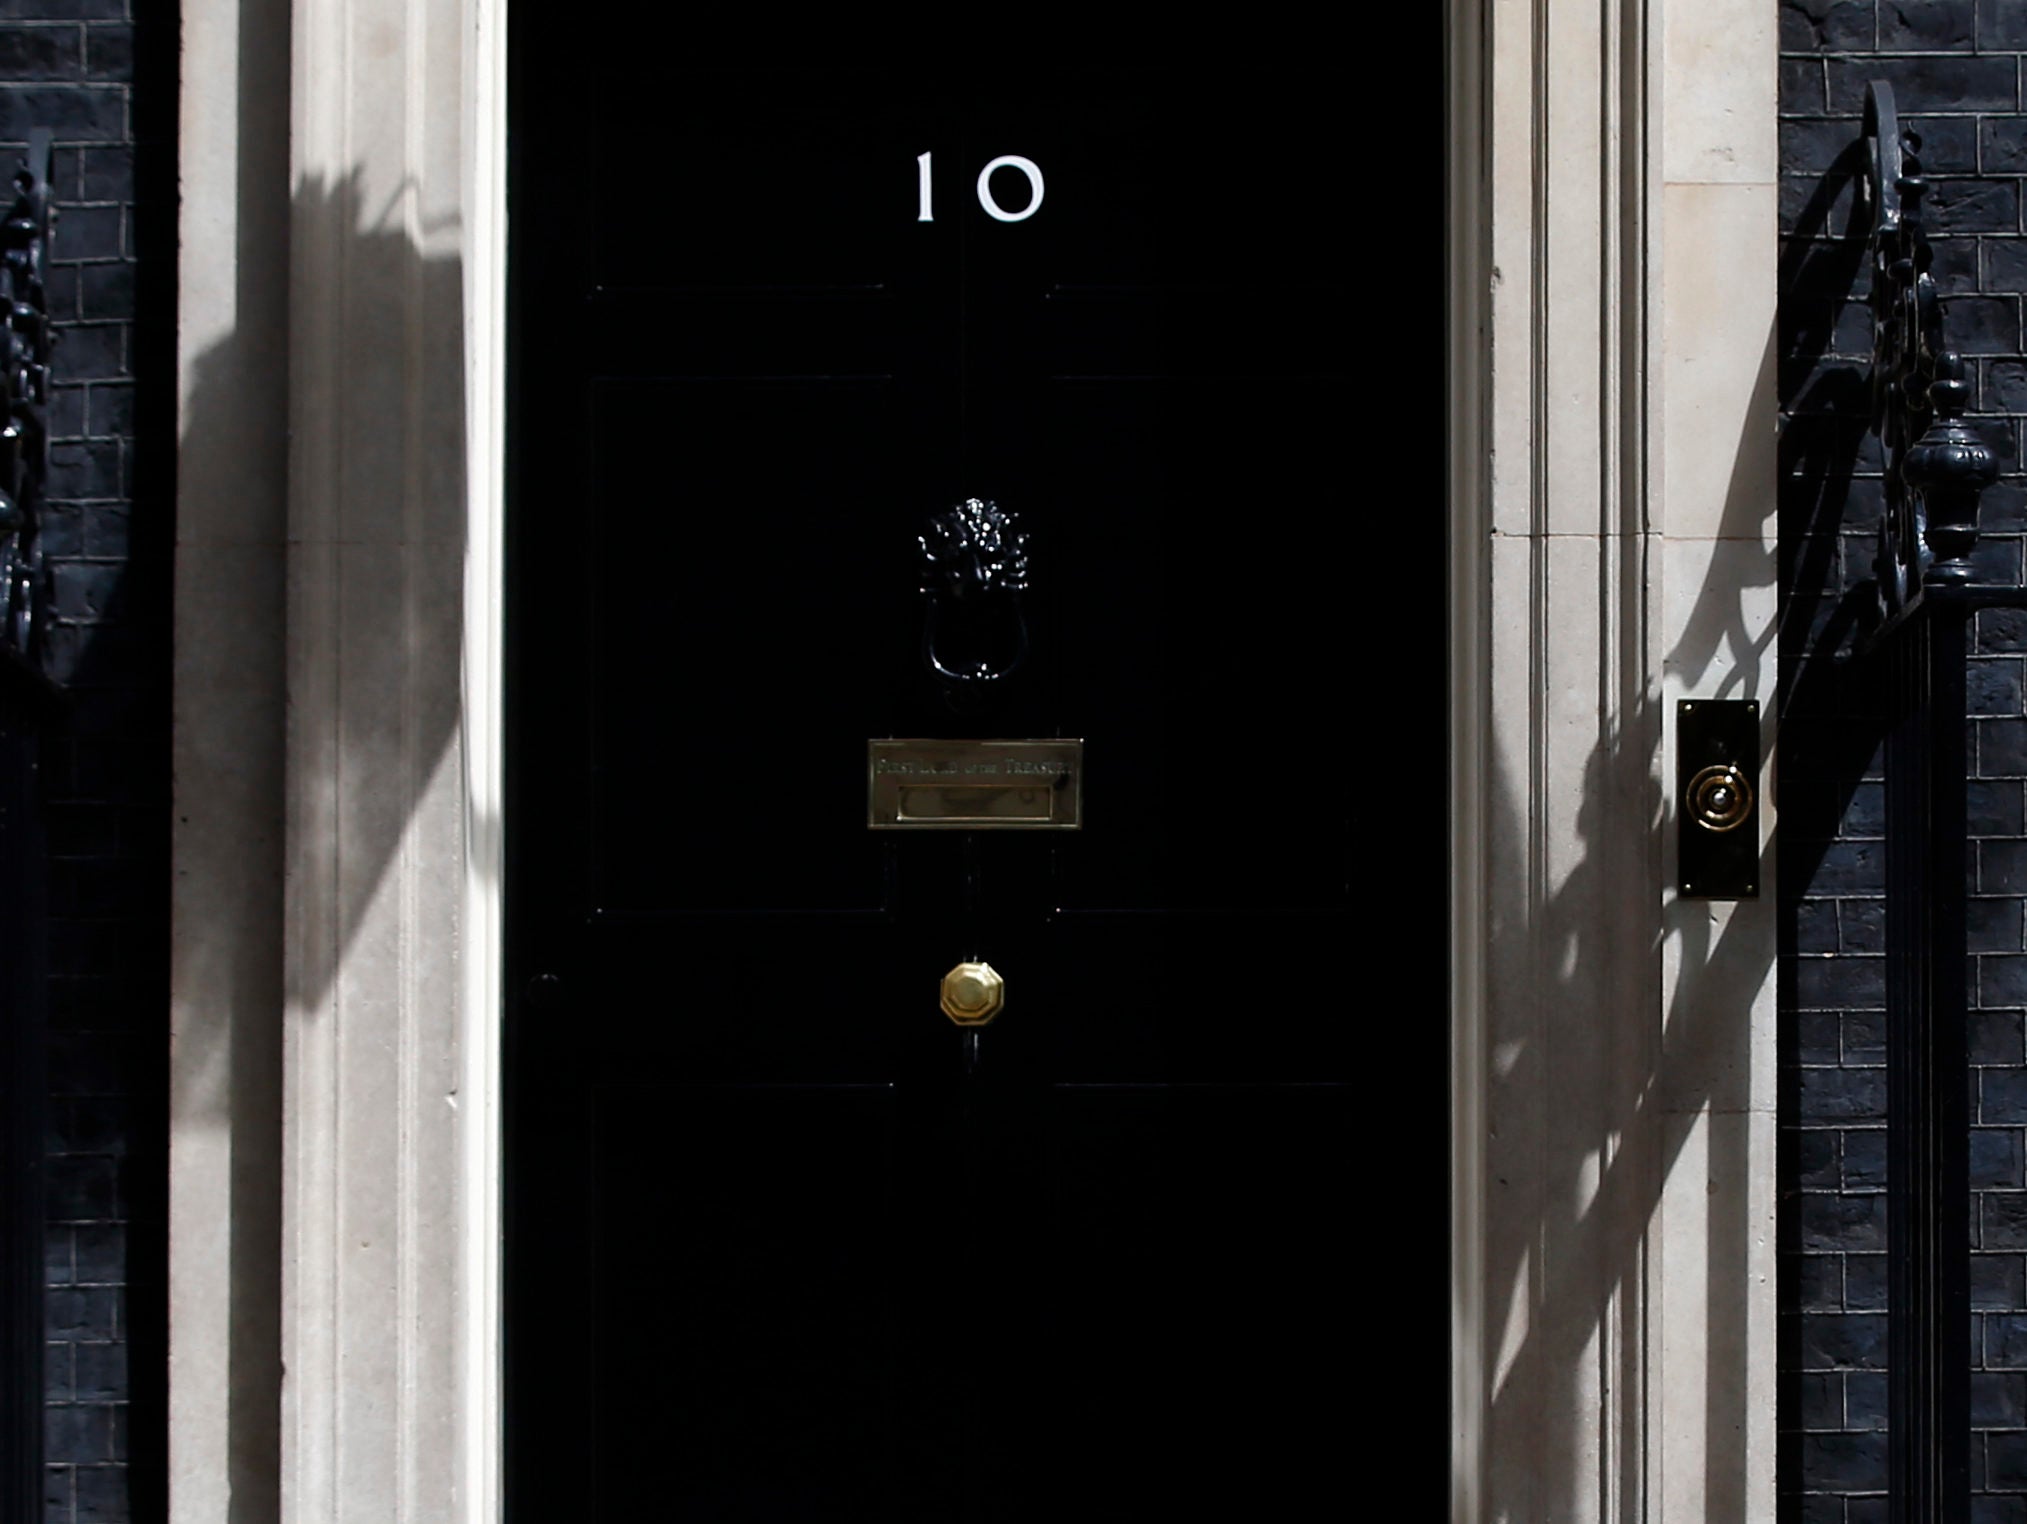 Cabinet Office urged to investigate Number 10's selective briefing of political journalists after Lobby walkout